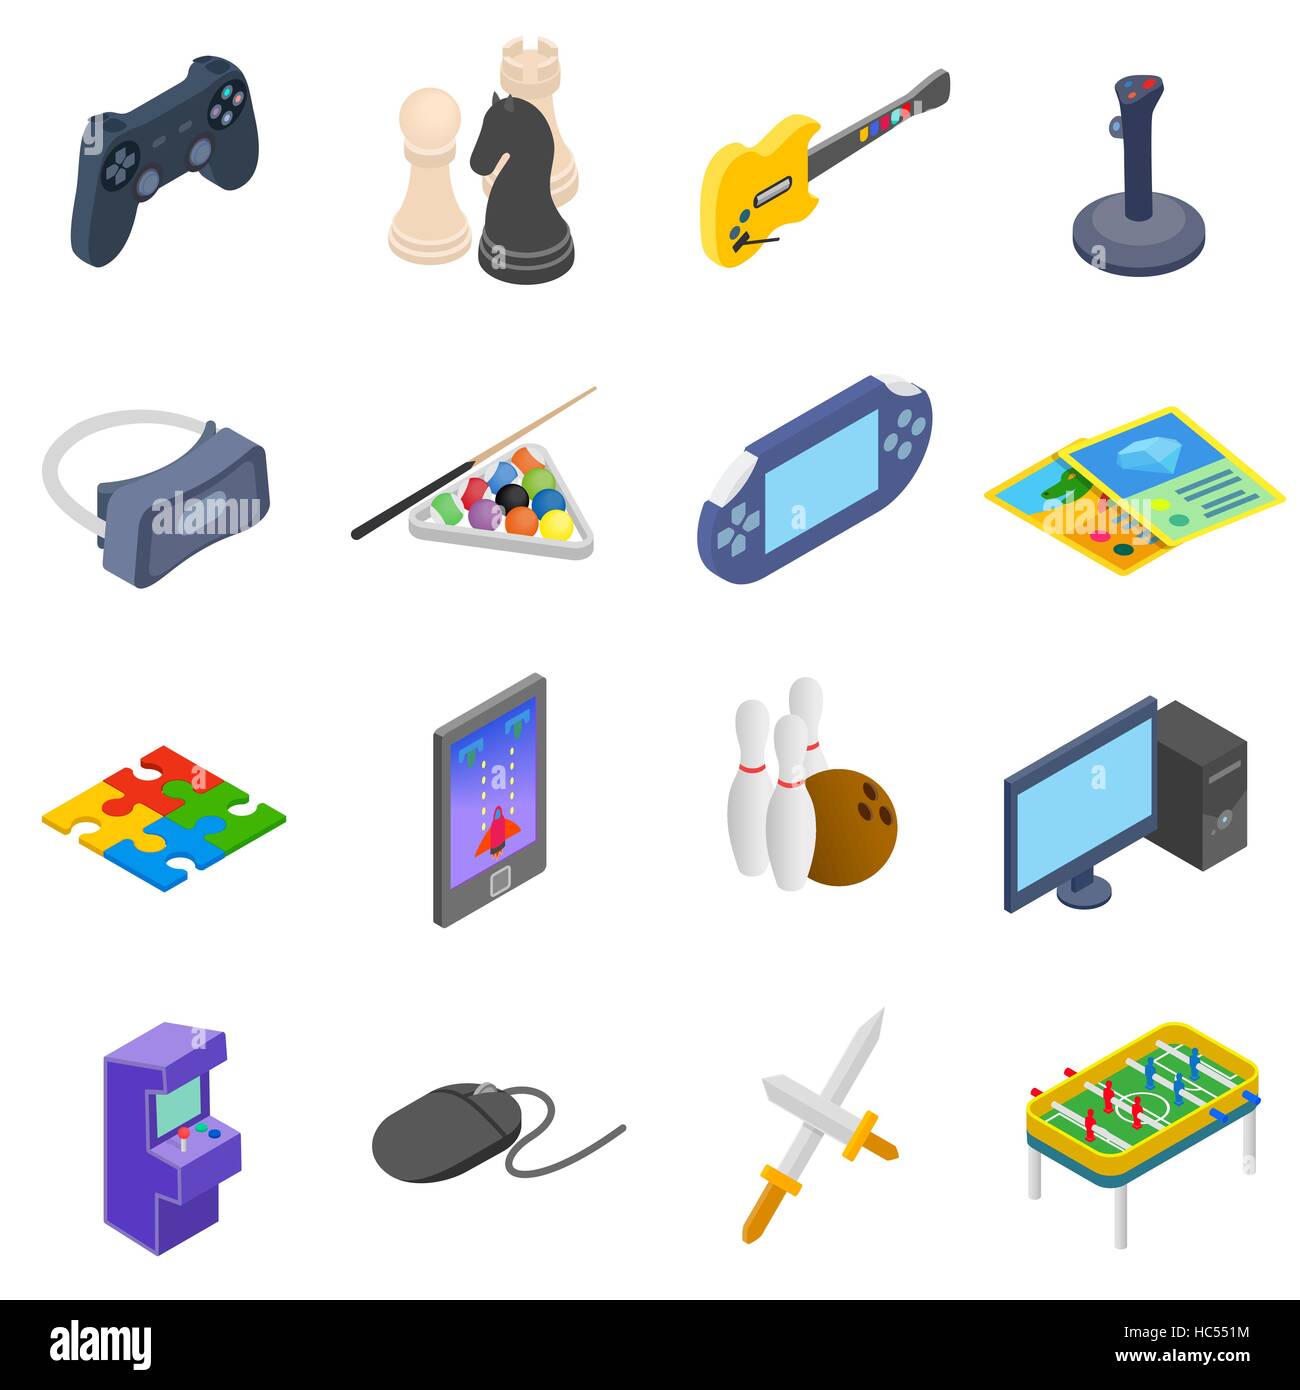 Games icons set Stock Vector